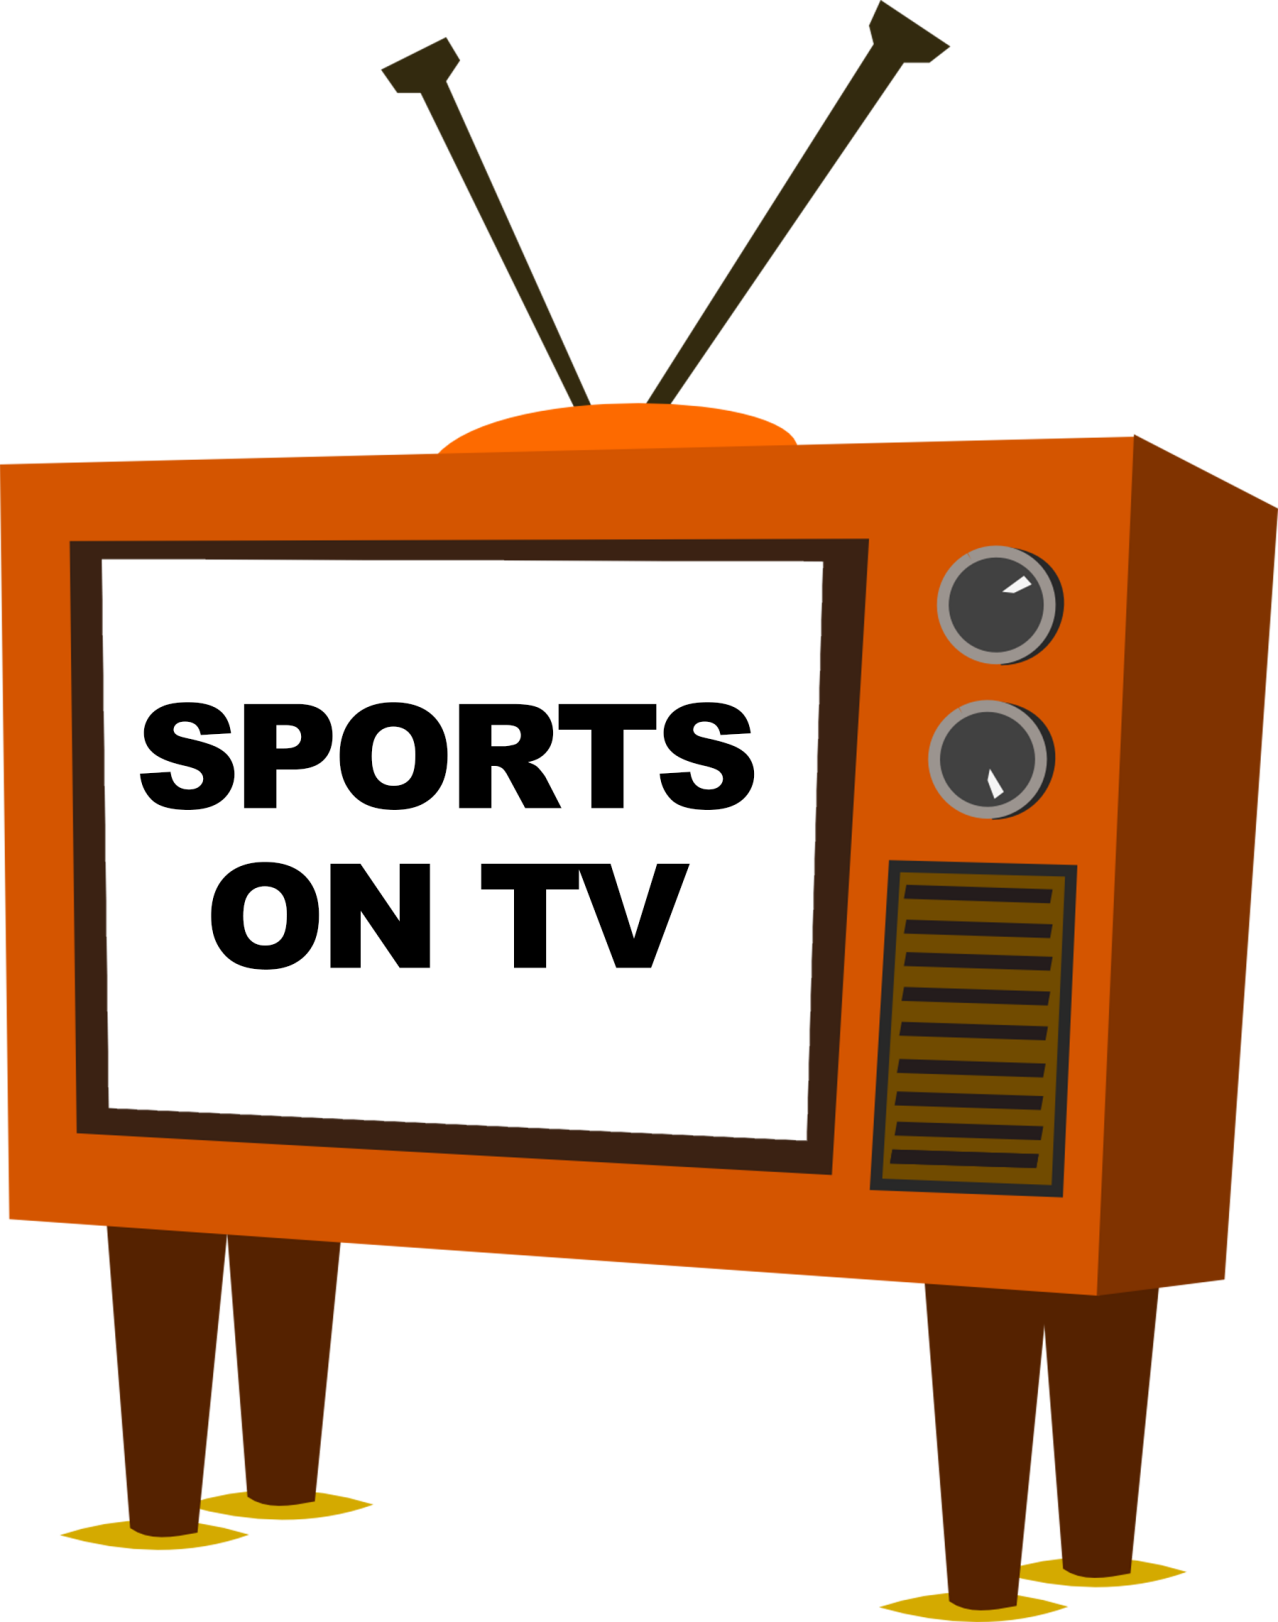 Exciting Sports Weekend: NHL and AHL Hockey, NASCAR, NFL All-Star Game, College Basketball, Tennis, Soccer, and More